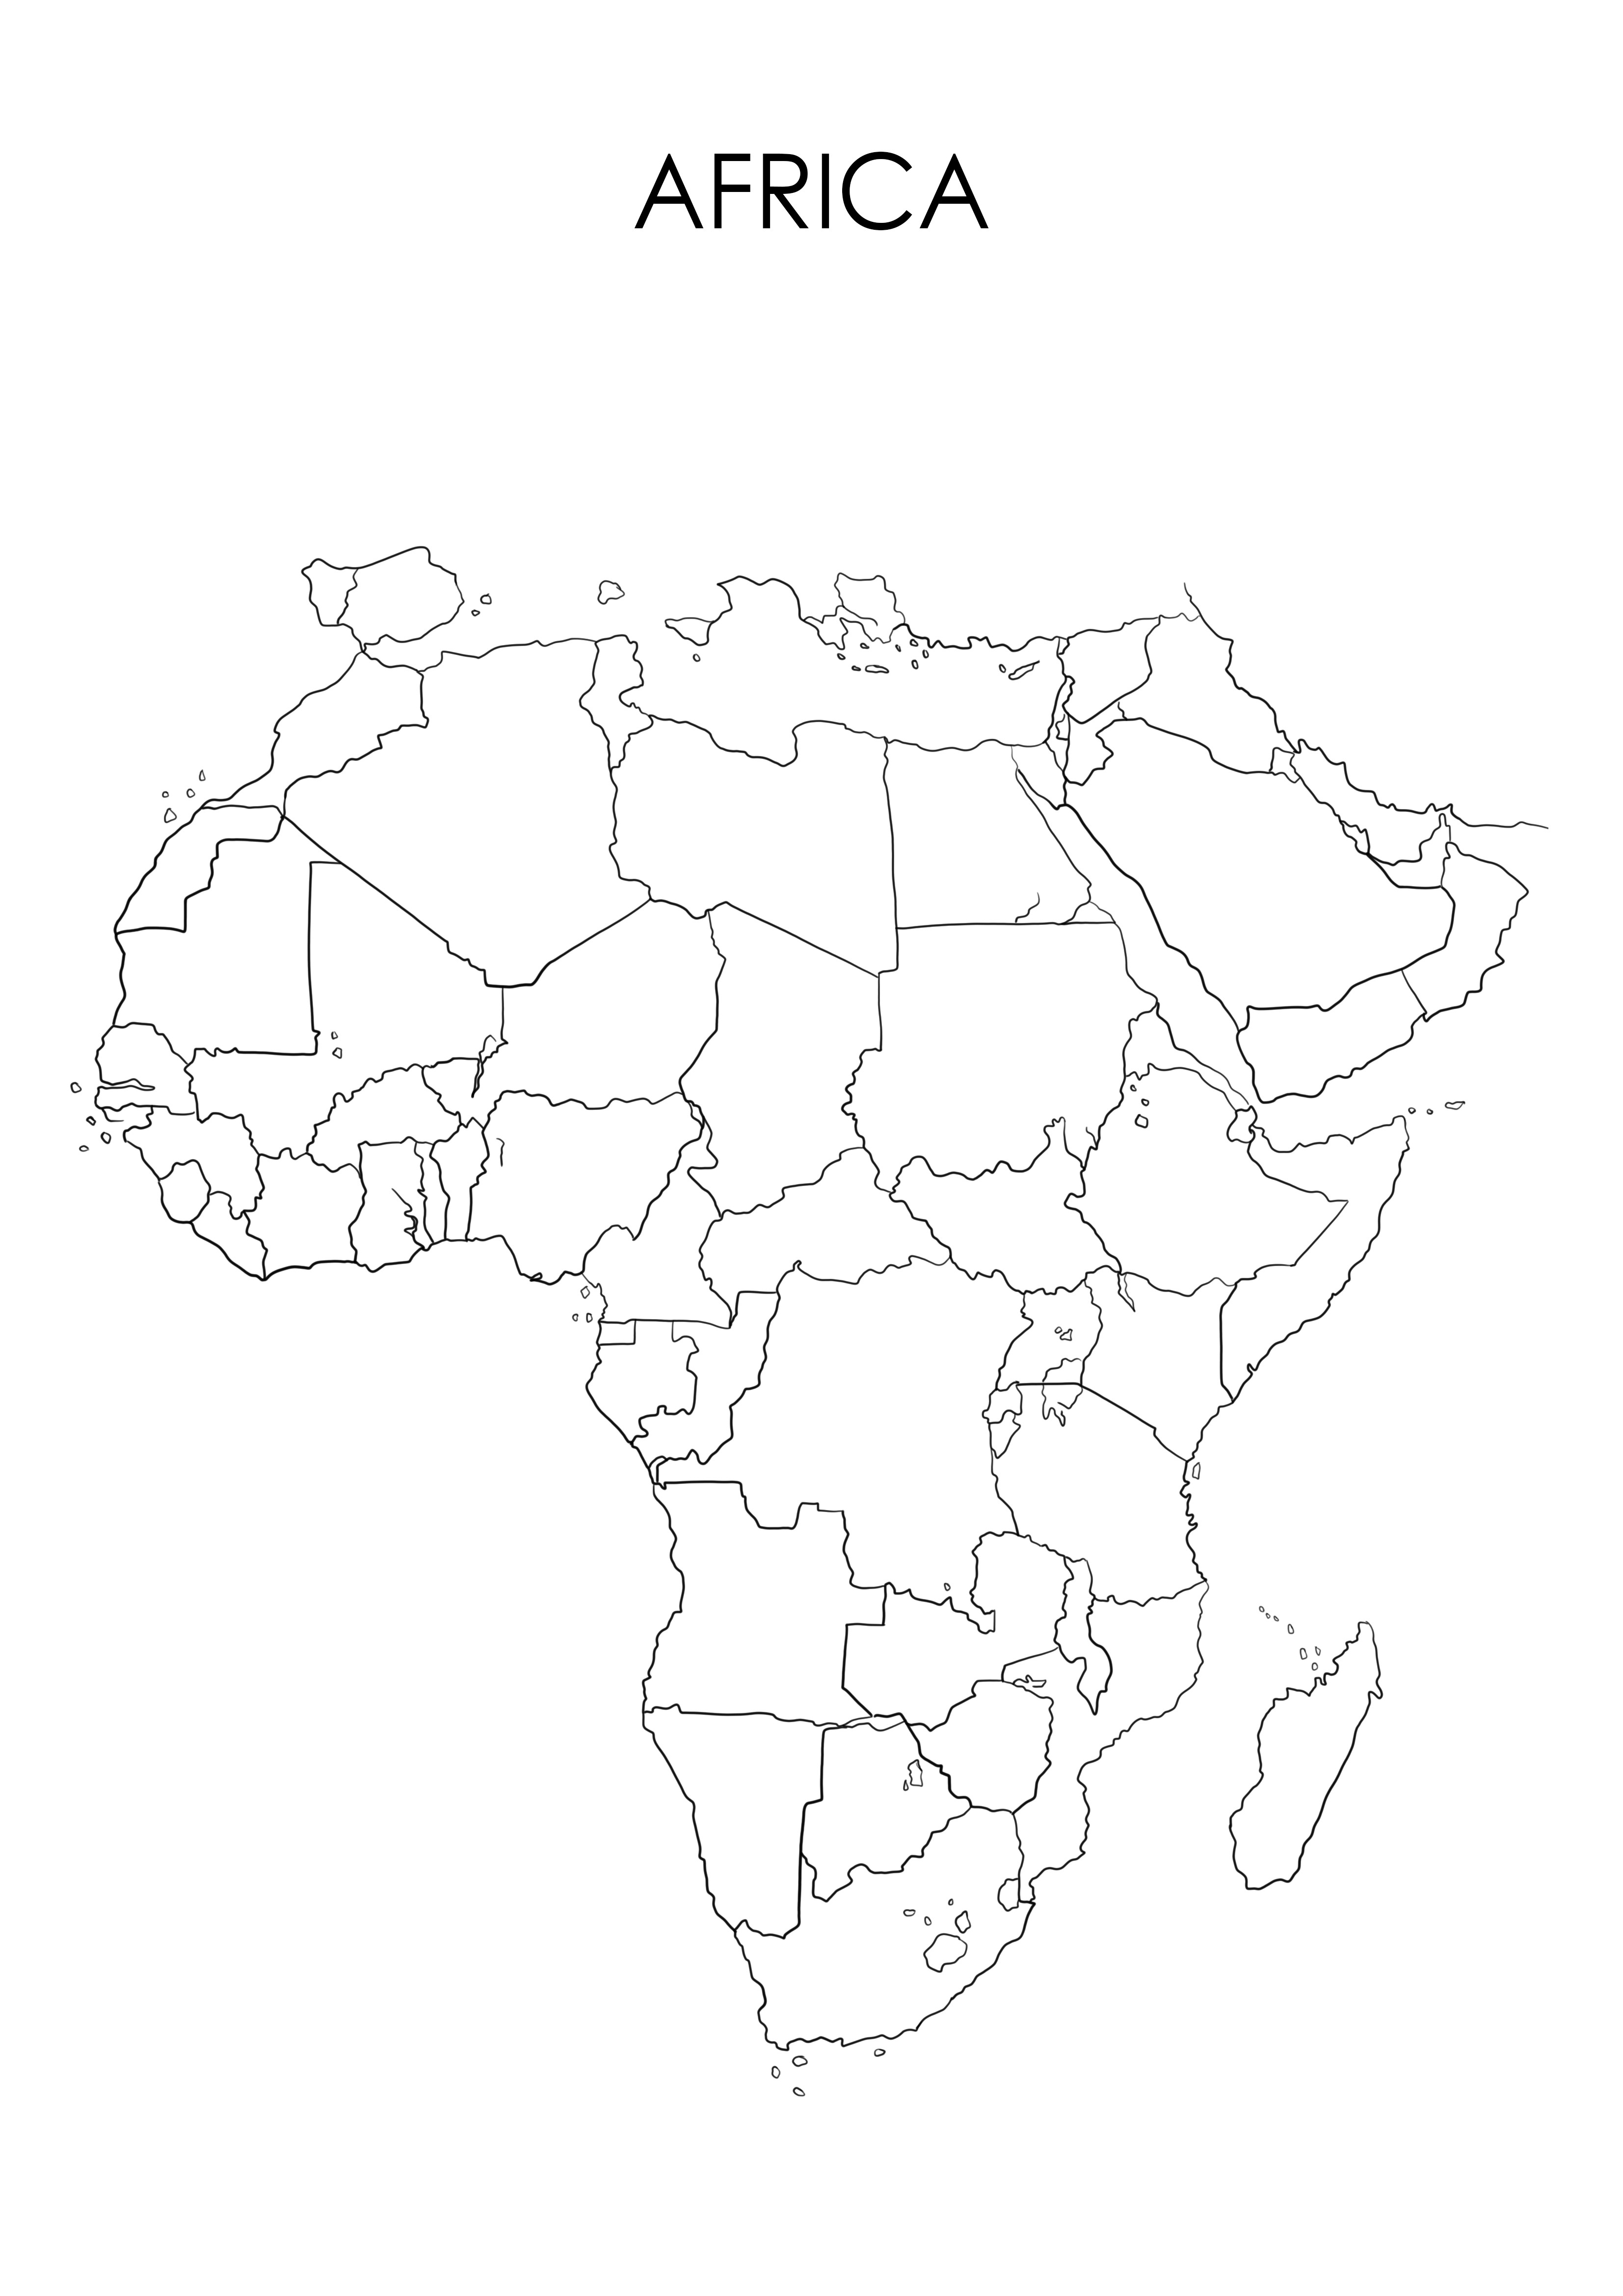 Africa map free printable for easy coloring